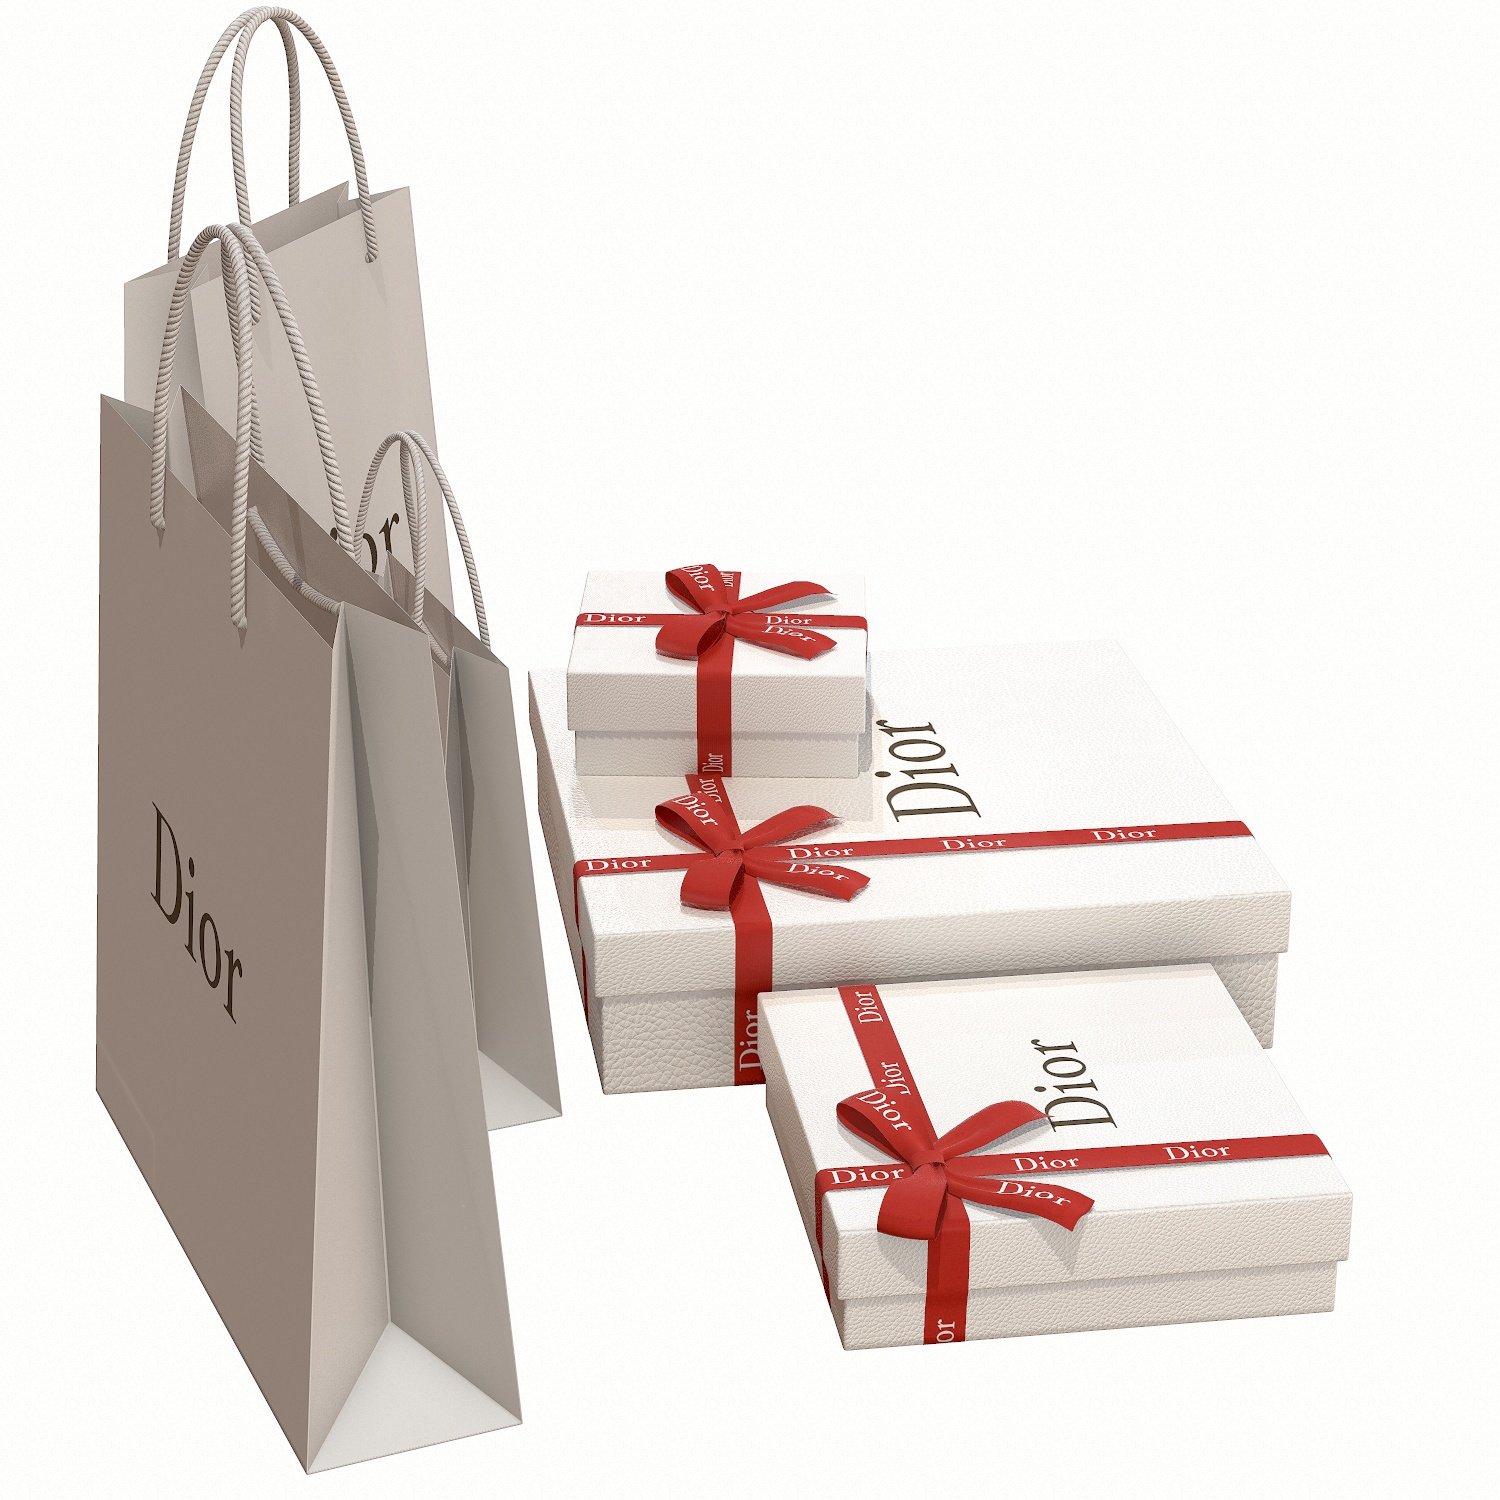 3D Model Collection Luxury Gift Packaging Boxes and Paper Bags VR / AR /  low-poly